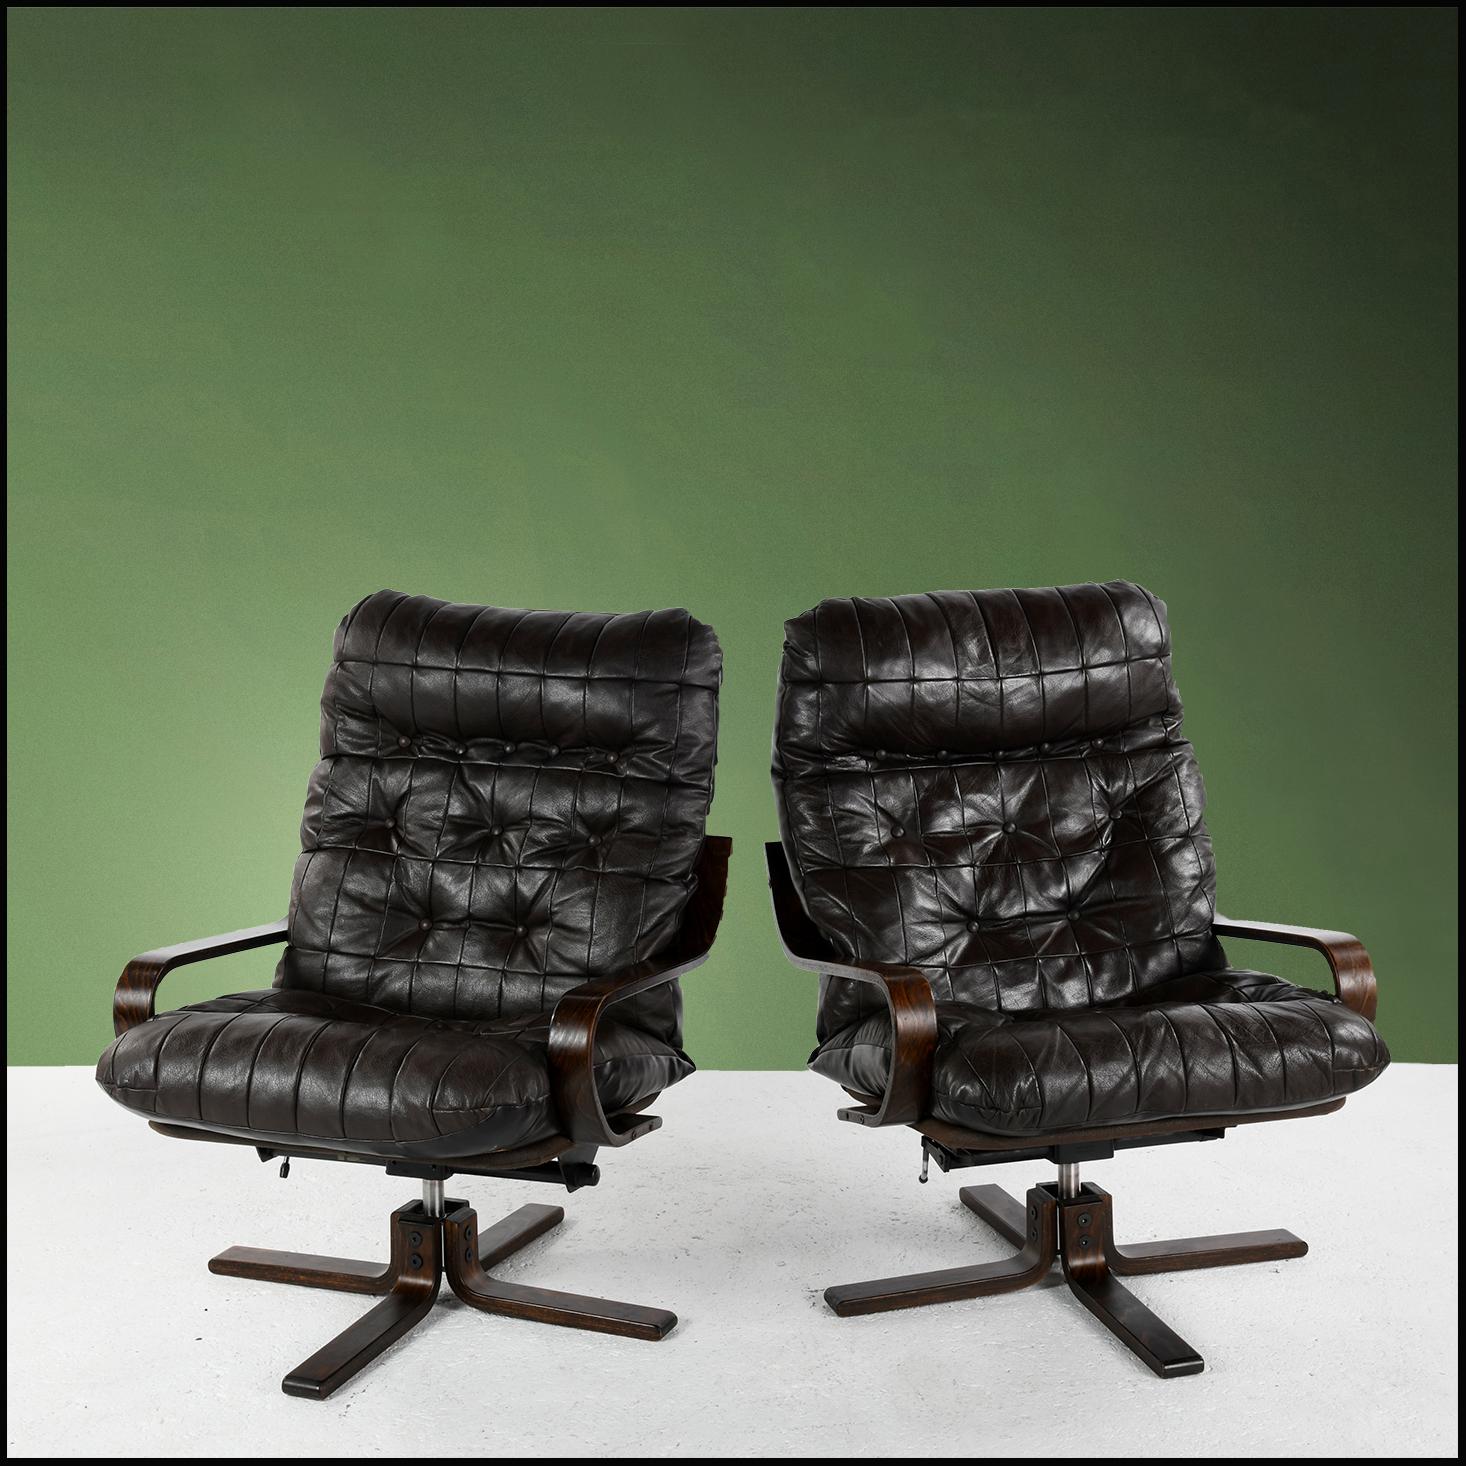 Pair of leather lounge chairs from the 1960s-70s, Scandinavian manufacture, mechanism marked 